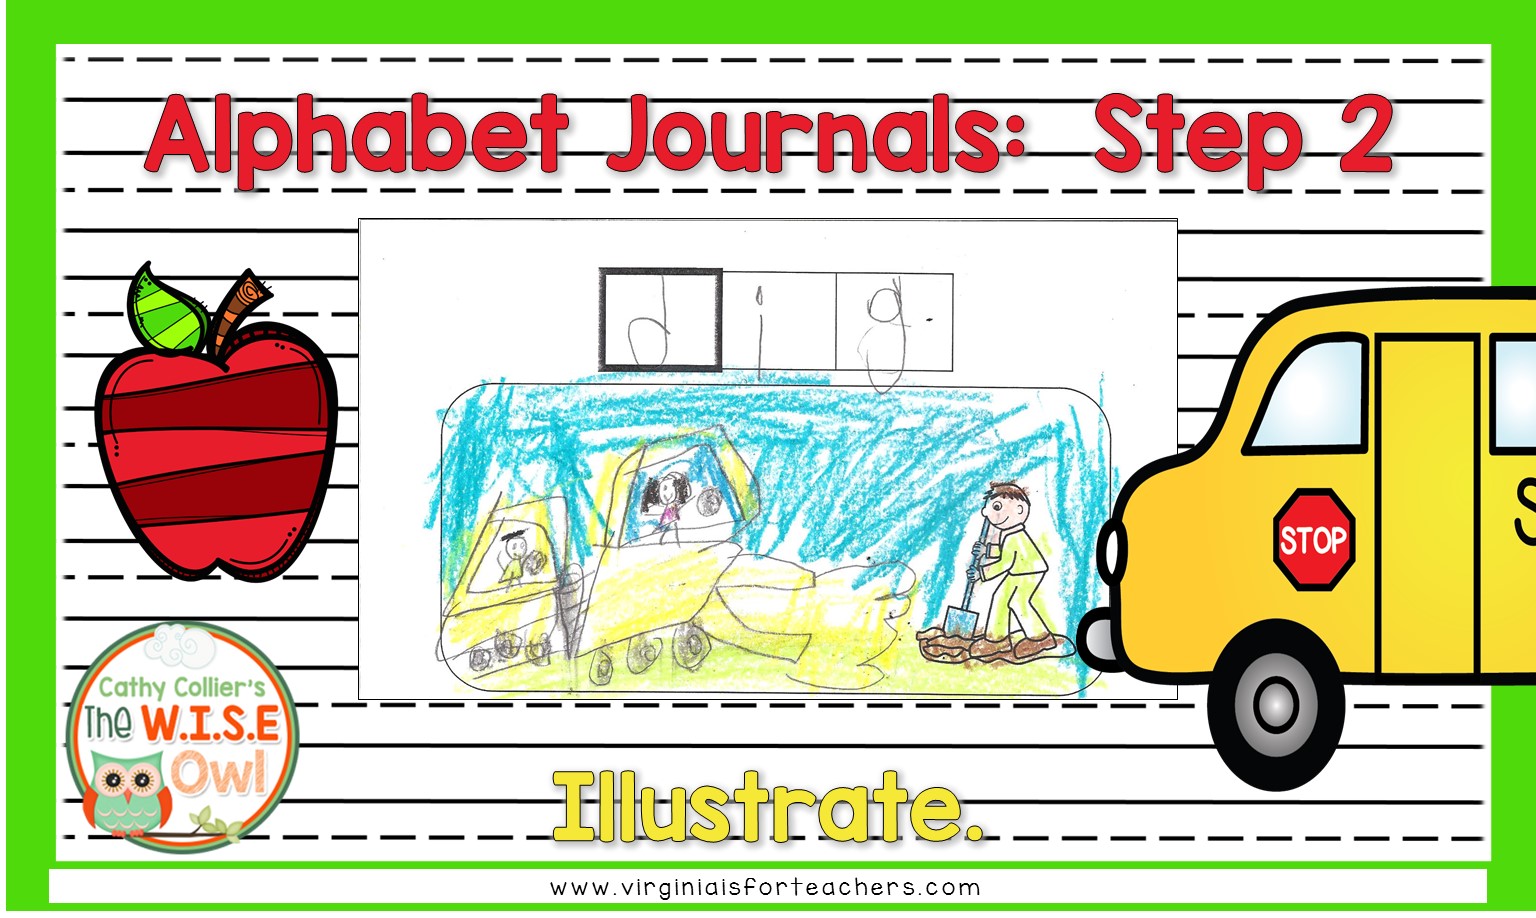 Writing can be challenging at the beginning of first grade. These journals can help students decode, create, and illustrate.